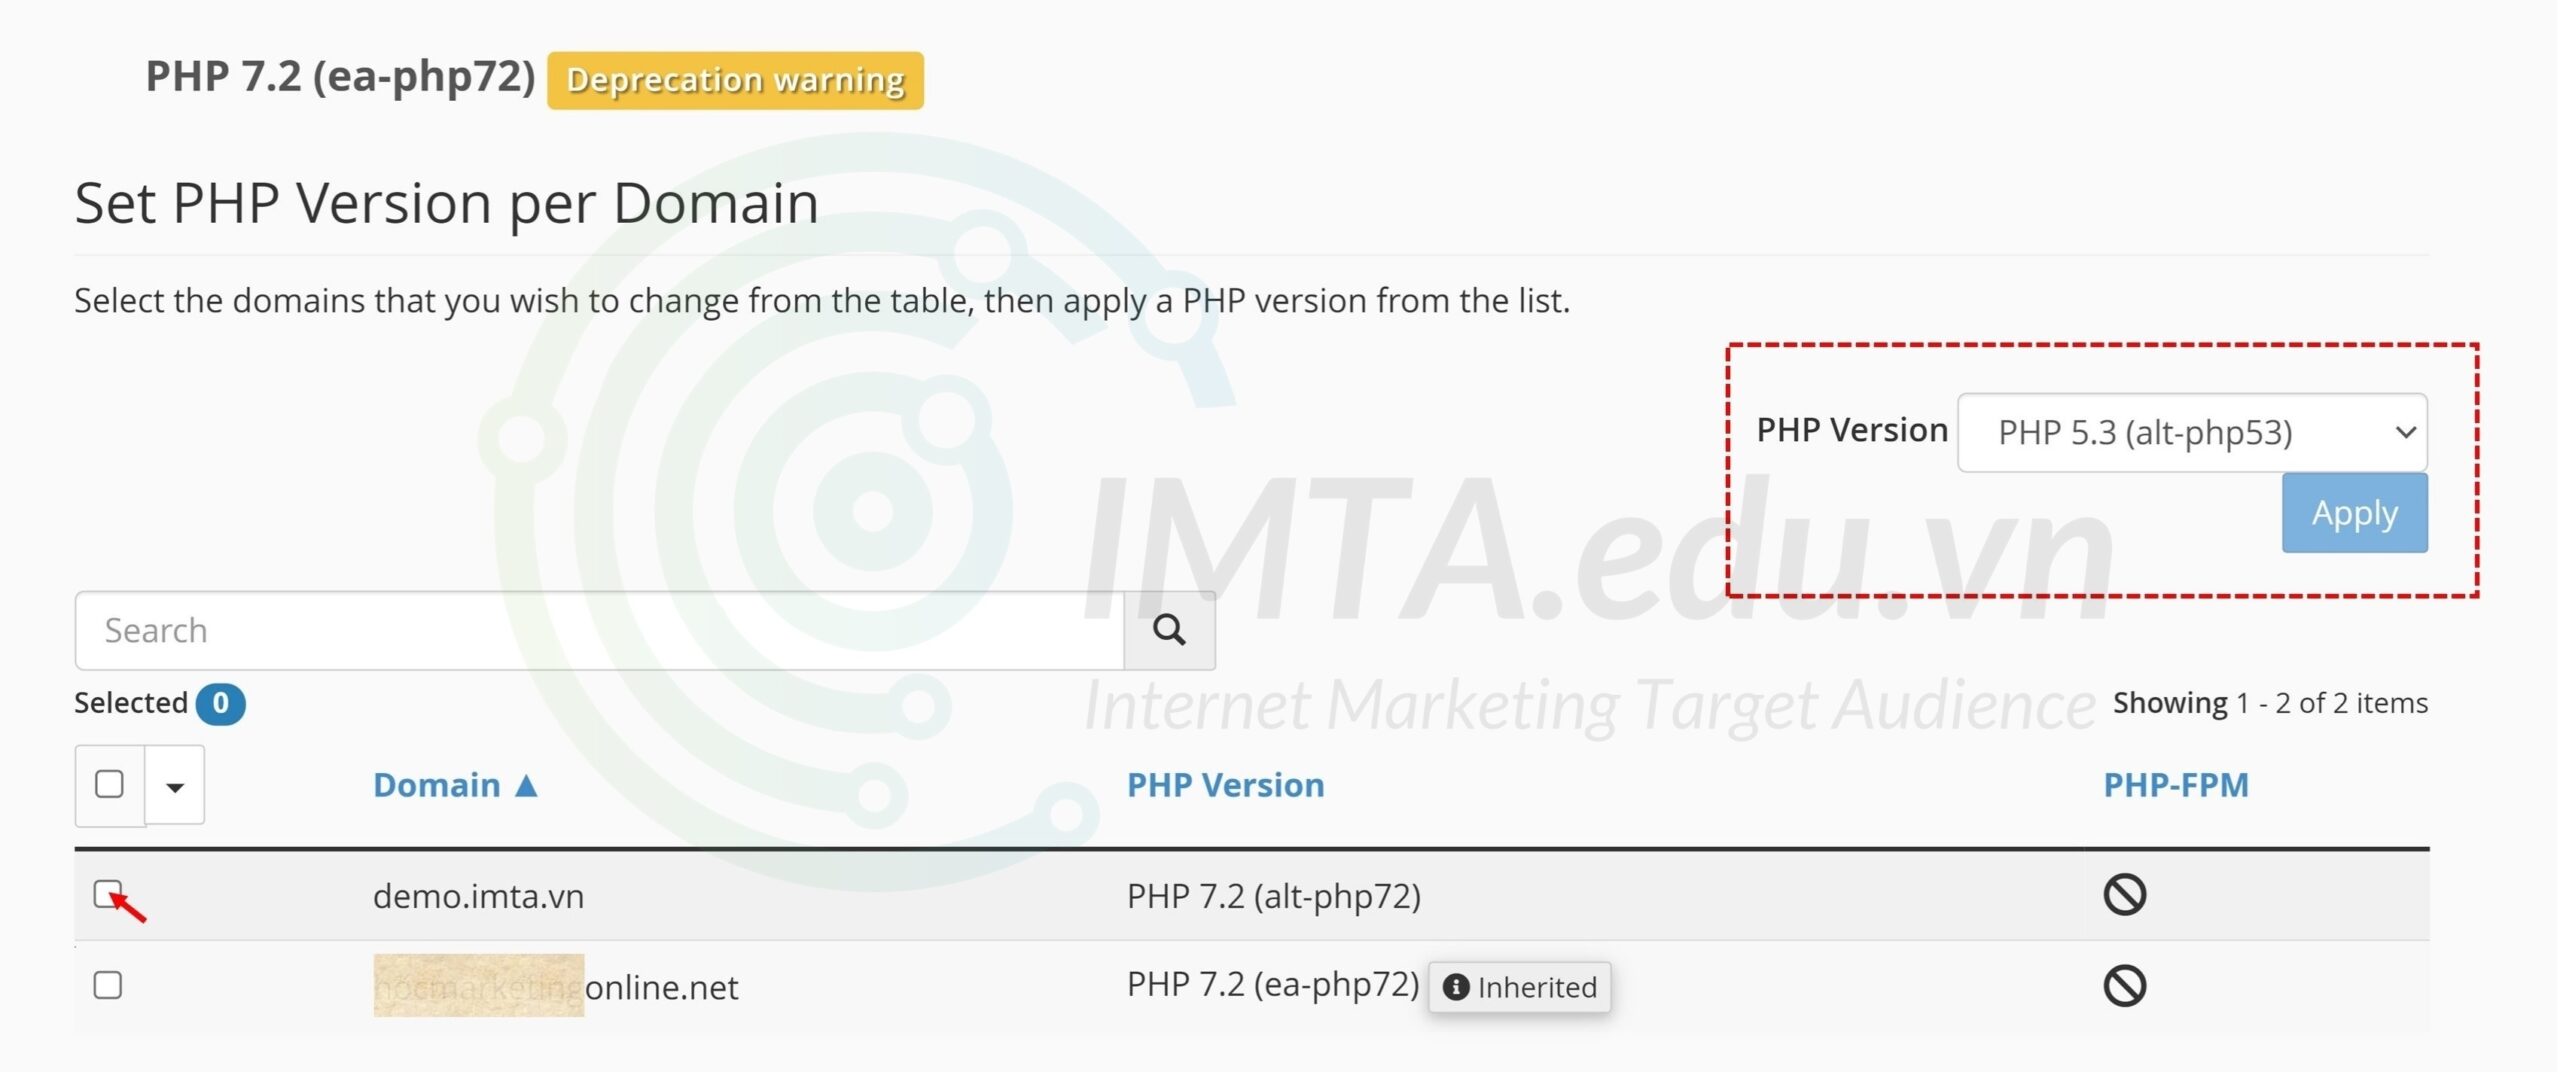 Select the domain name to upgrade the php version